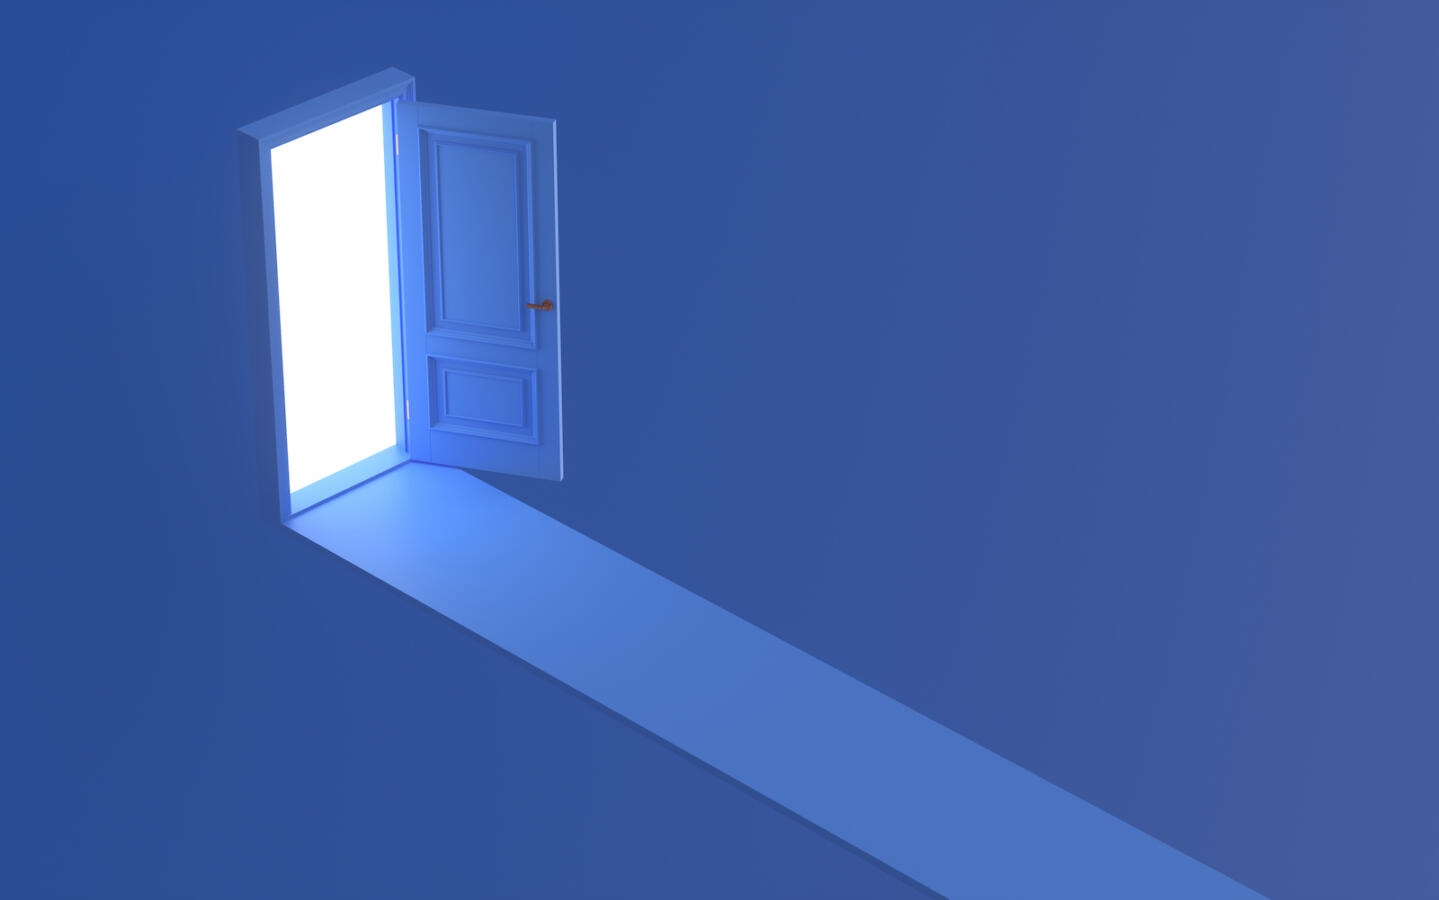 The door to the unknown in the blue space